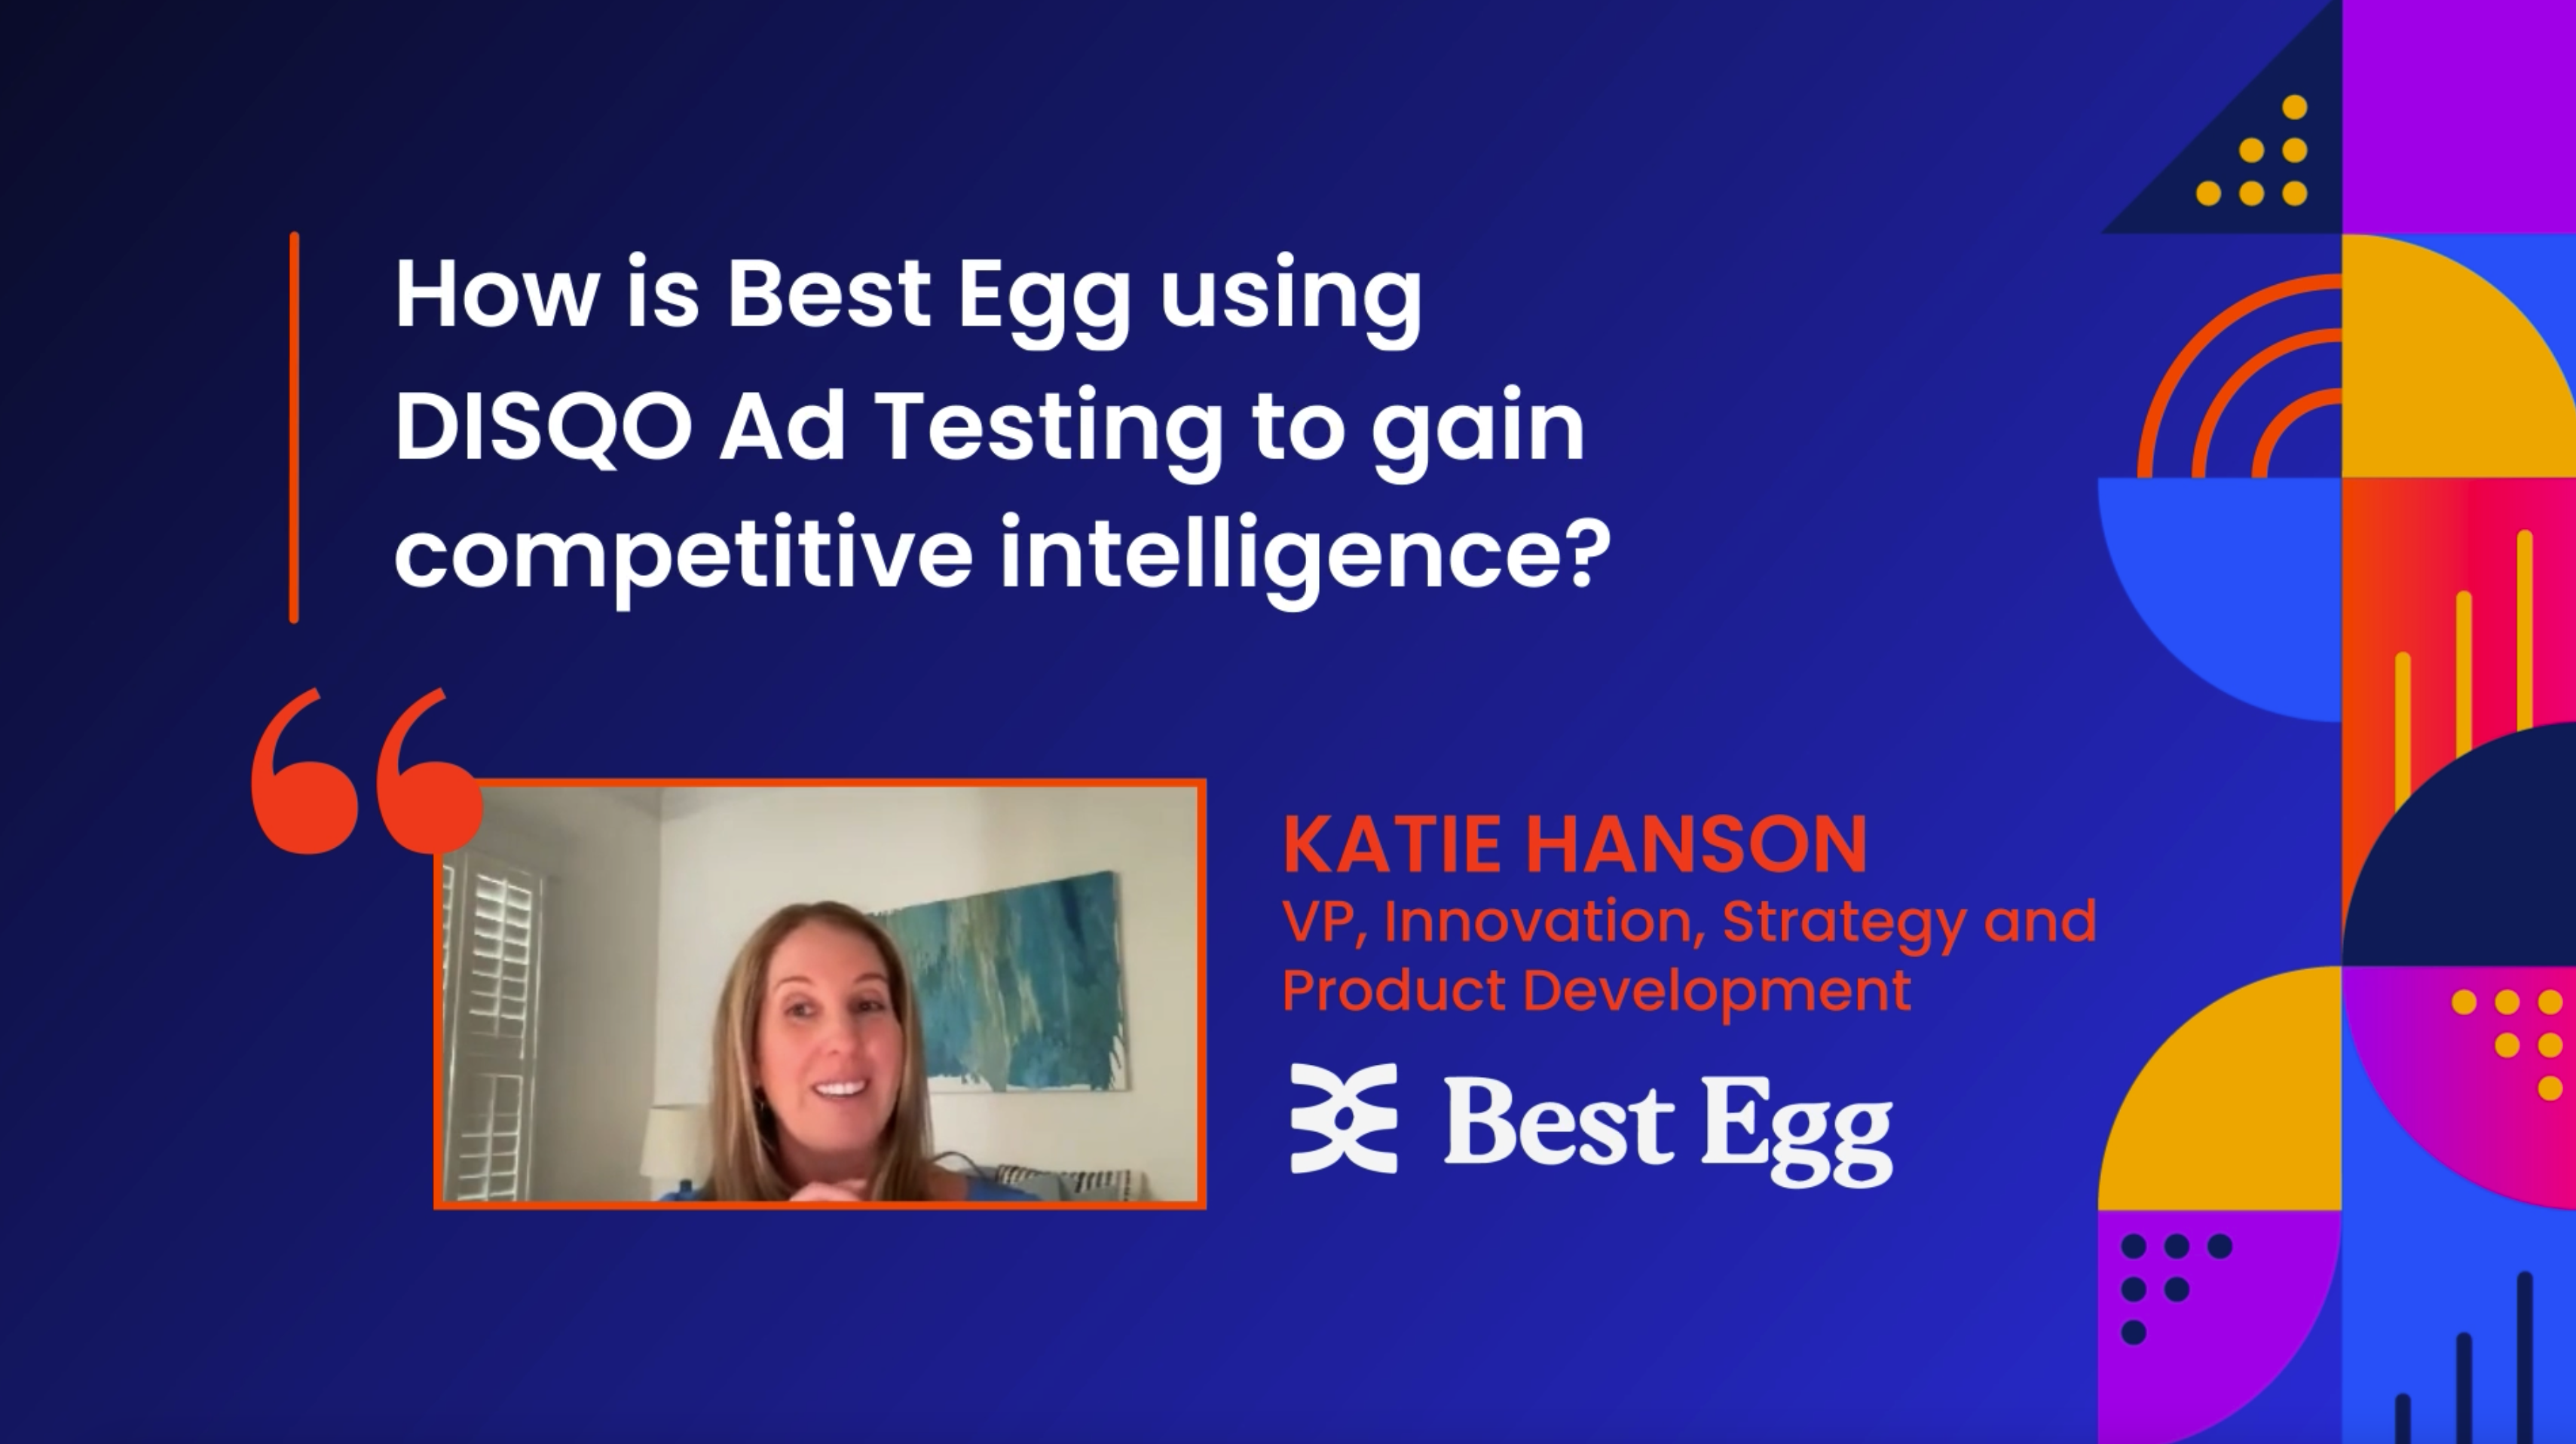 Image of a still from the Best Egg client video with Katie Hanson.